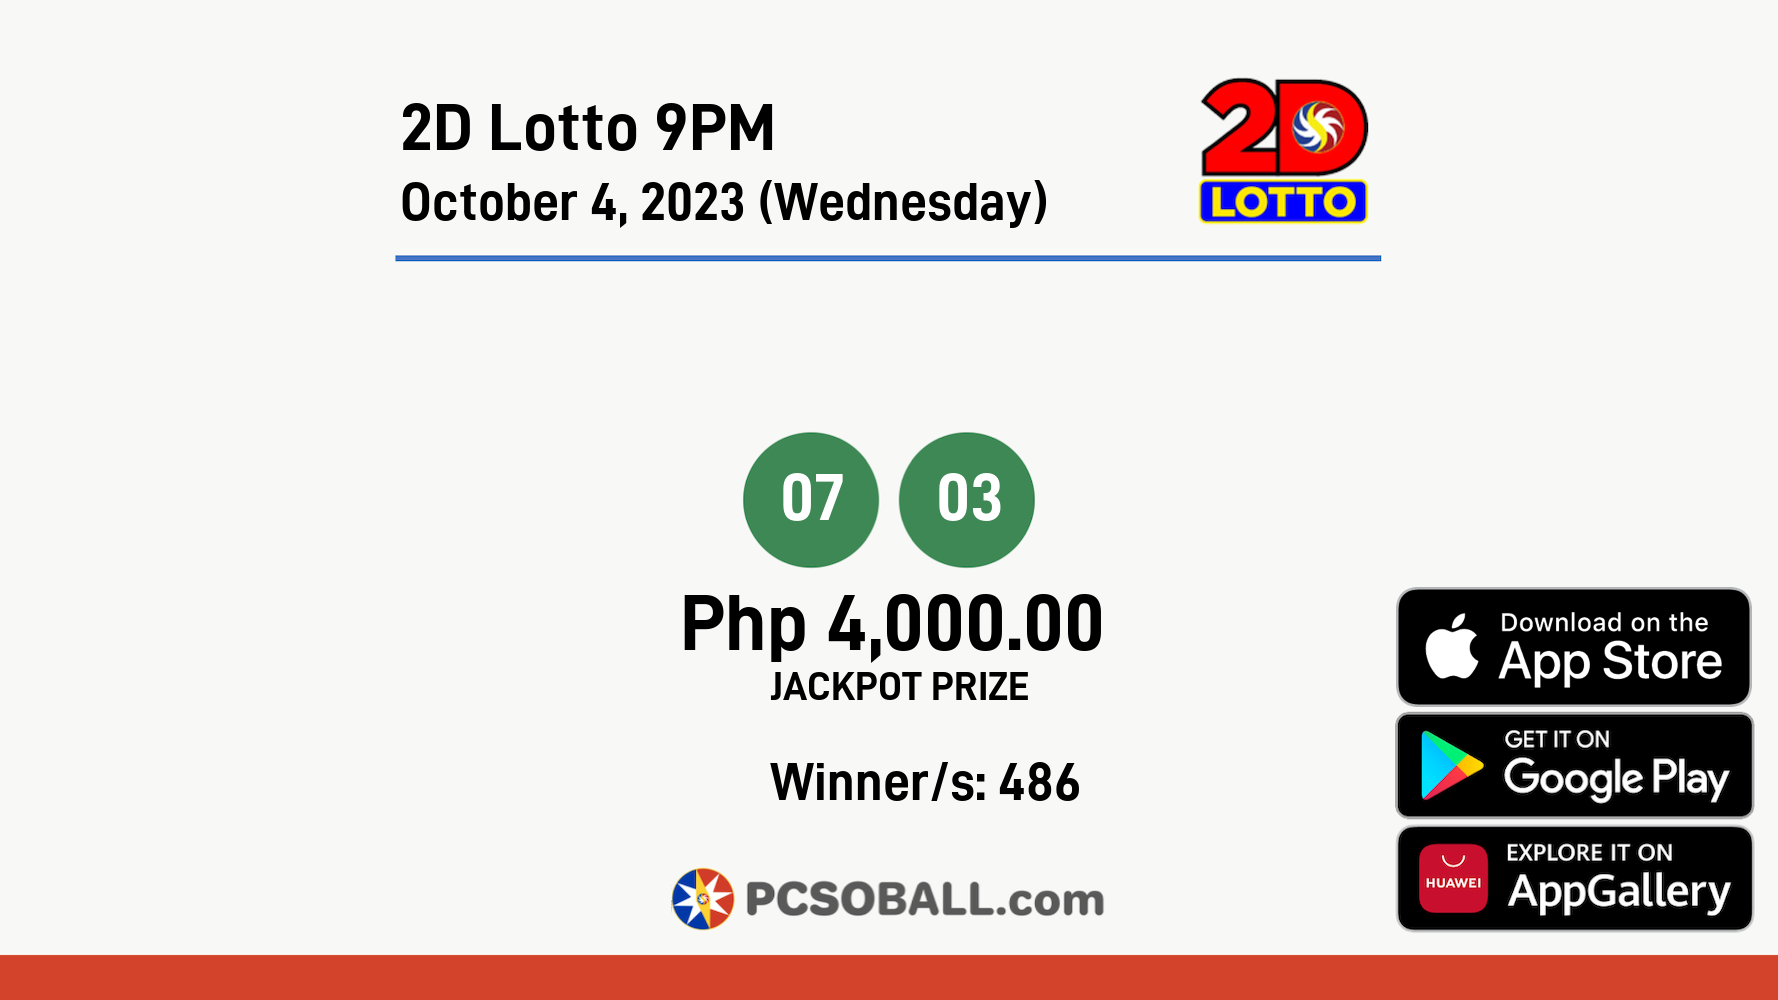 2D Lotto 9PM October 4, 2023 (Wednesday) Result